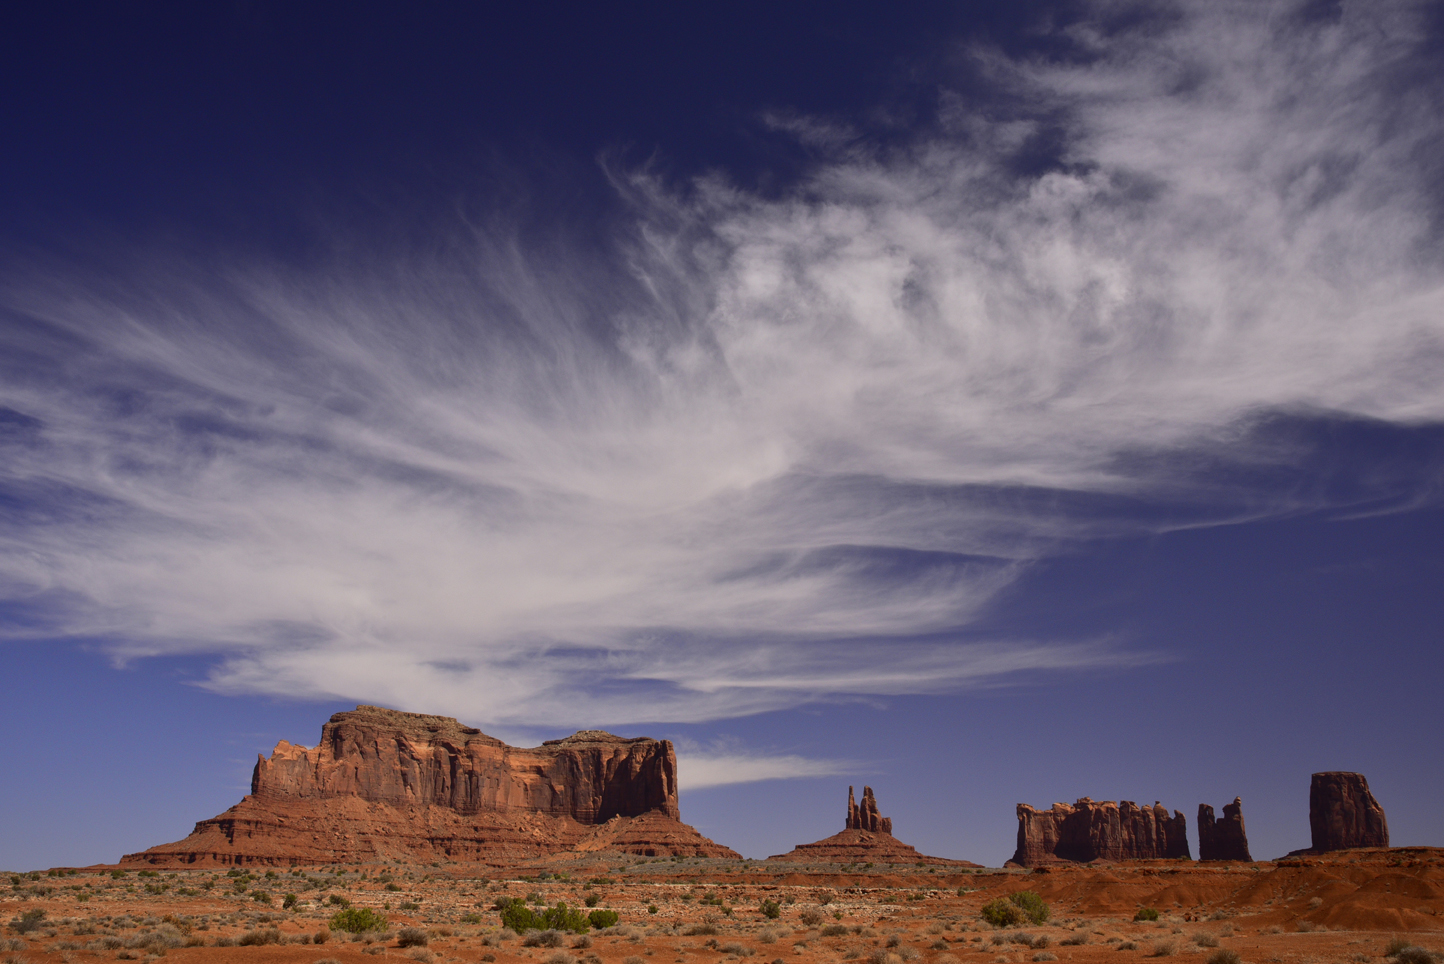 Sandstone formations, clouds  -  Monument Valley Area, Navajo Nation Land, Utah